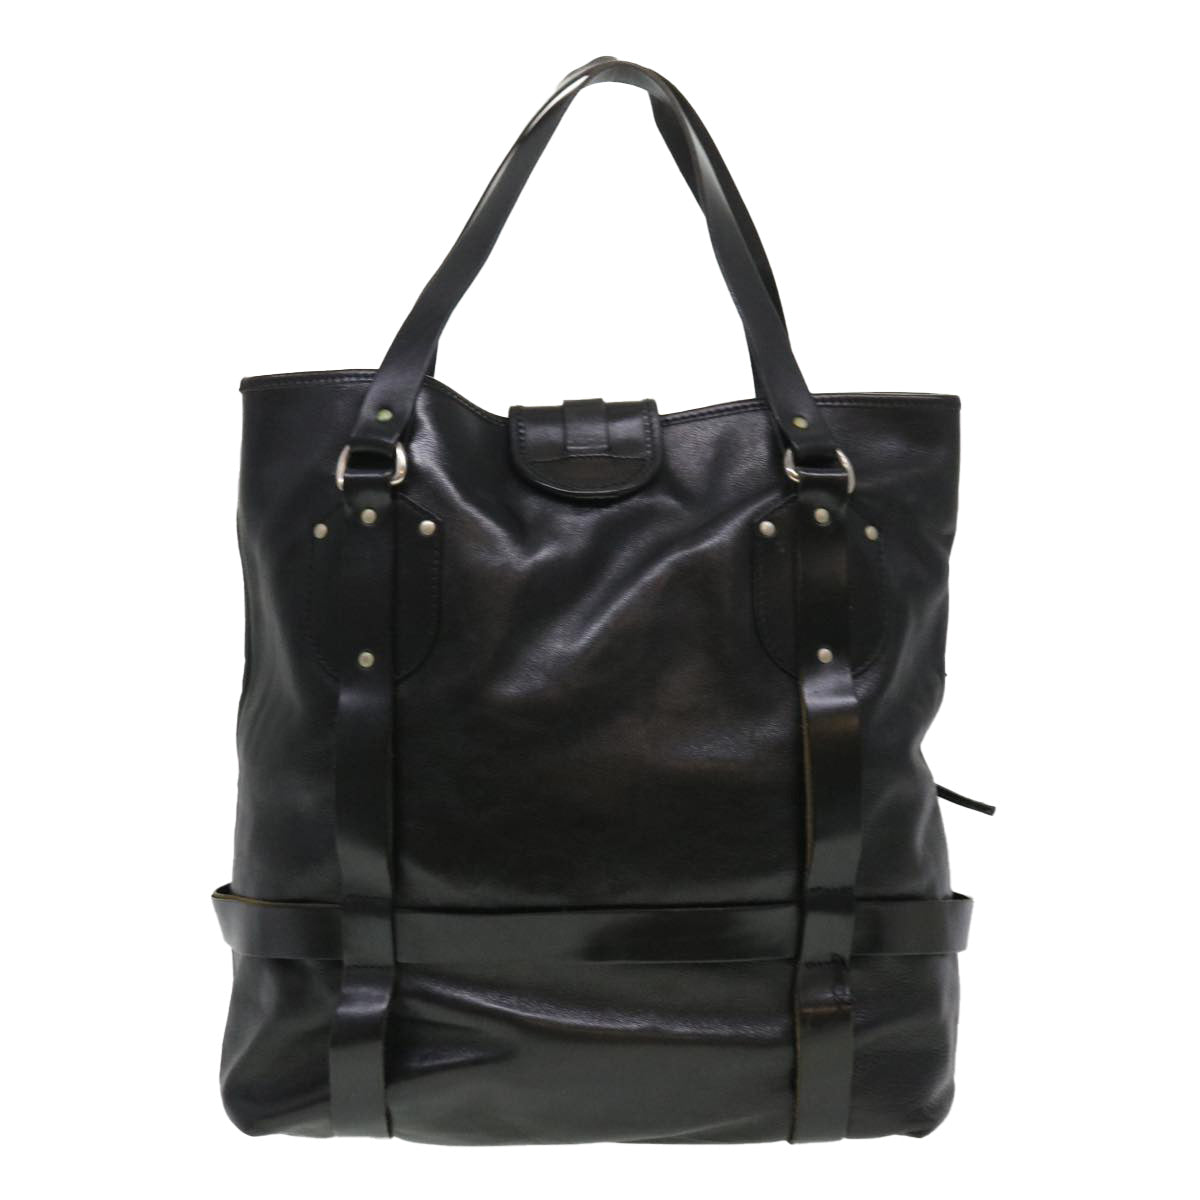 Chloe Tote Bag Leather Black Auth bs4744